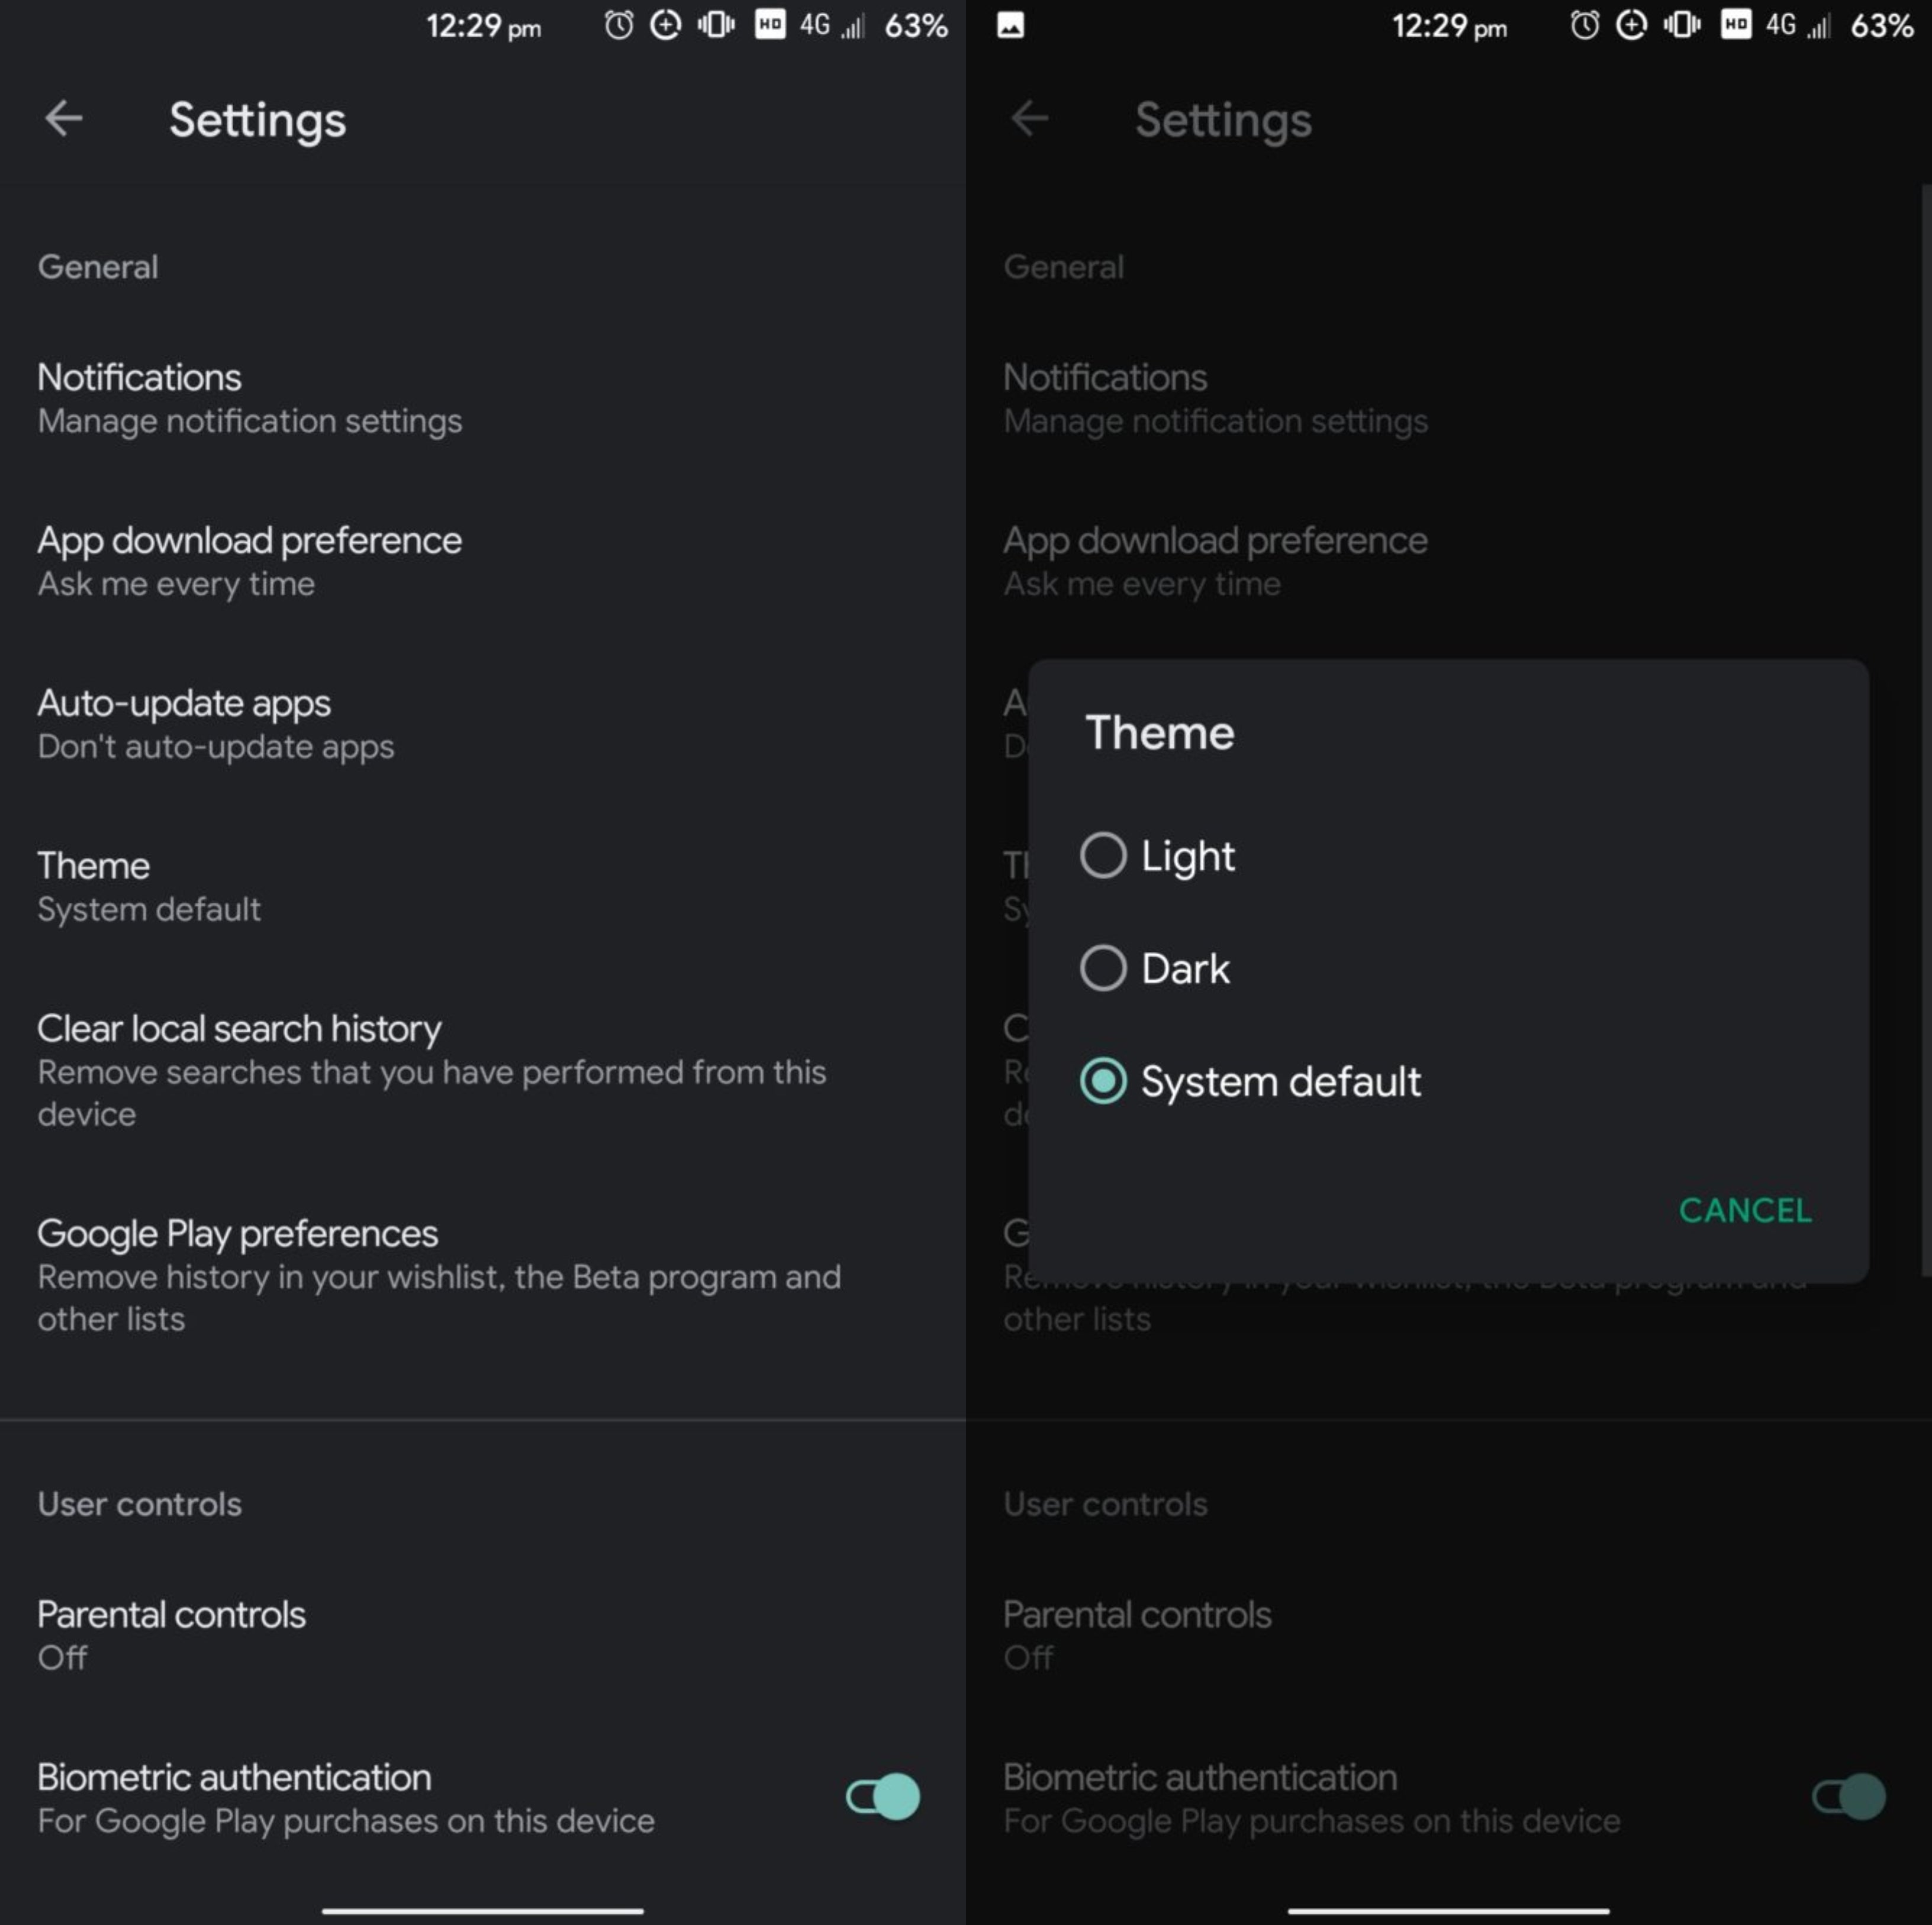 The elusive dark mode setting (Photos courtesy of Android Police) - The Play Store is getting this major feature at last